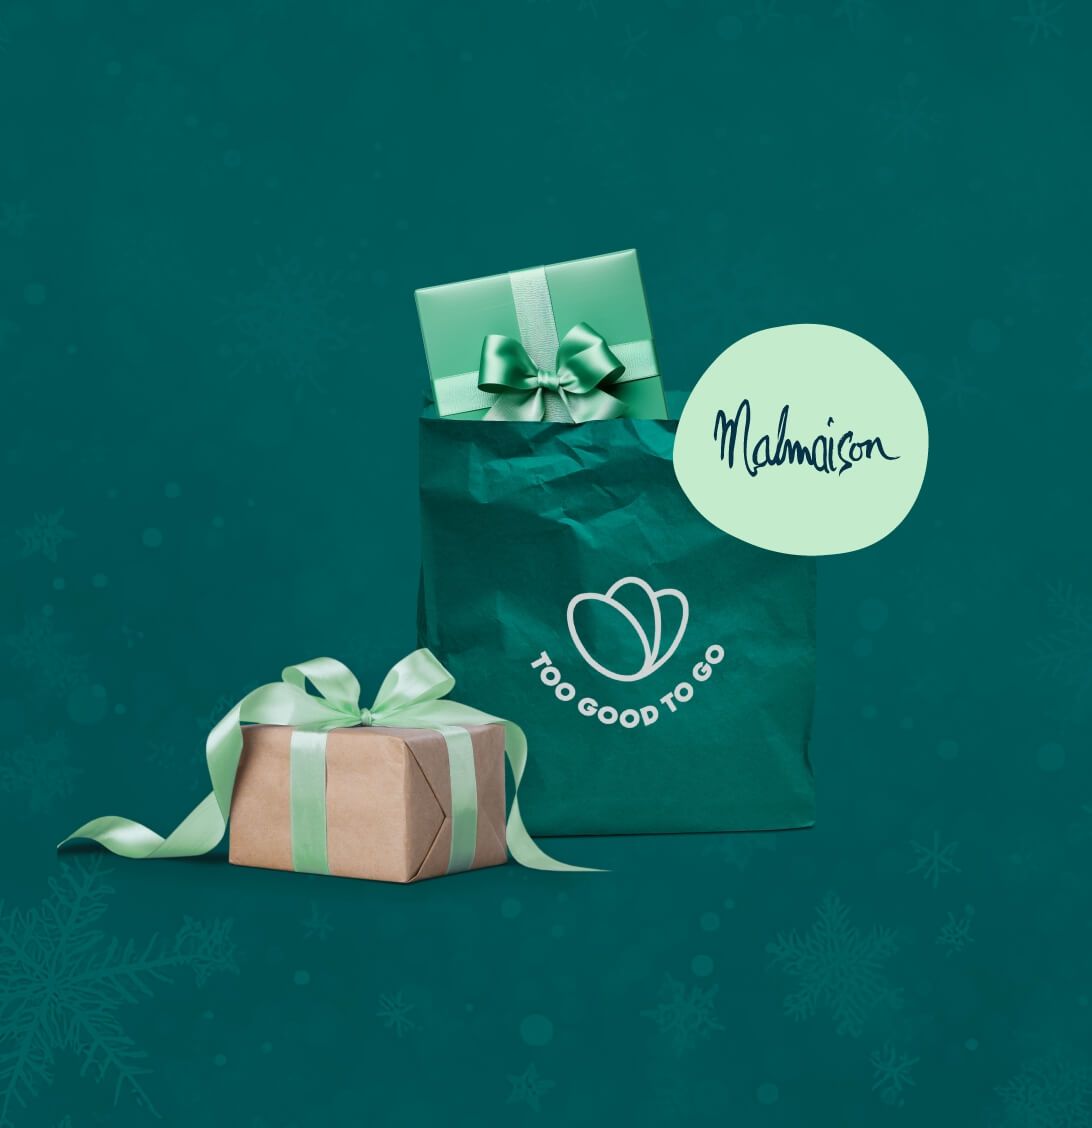 Save 2 Surprise Bags to win a night's stay in Malmaison Belfast